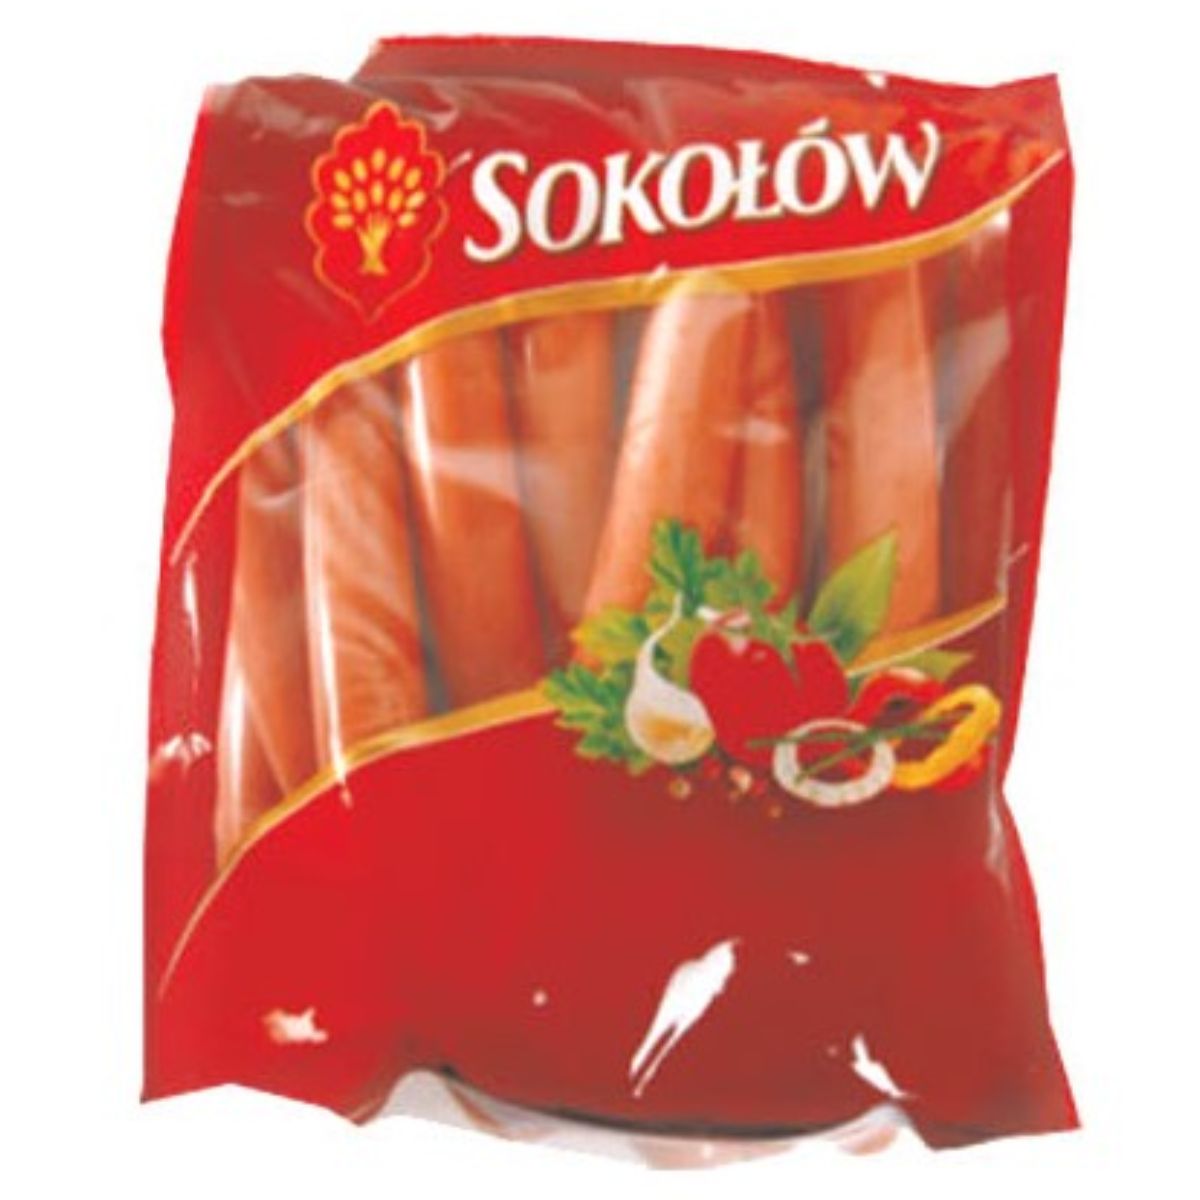 A bag of Sokolow - Farmers Franks with Turkey on a white background.